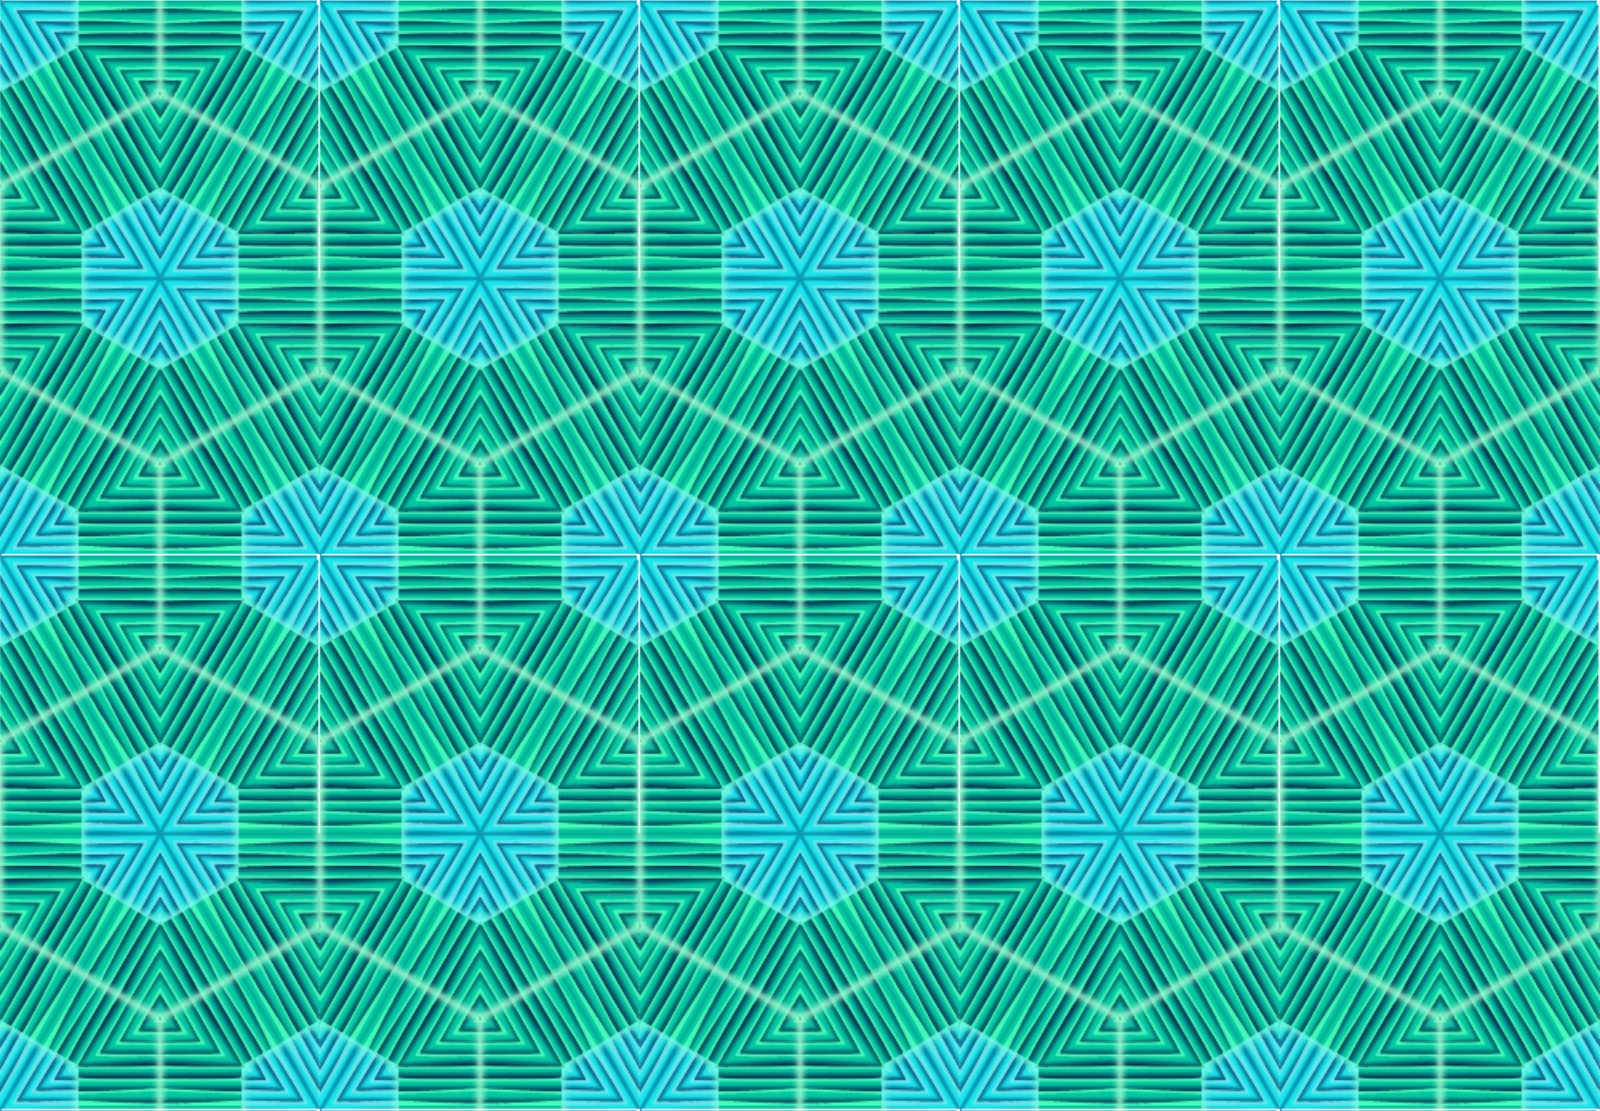 Green And Blue Soft Android Wallpaper SVG Clip arts